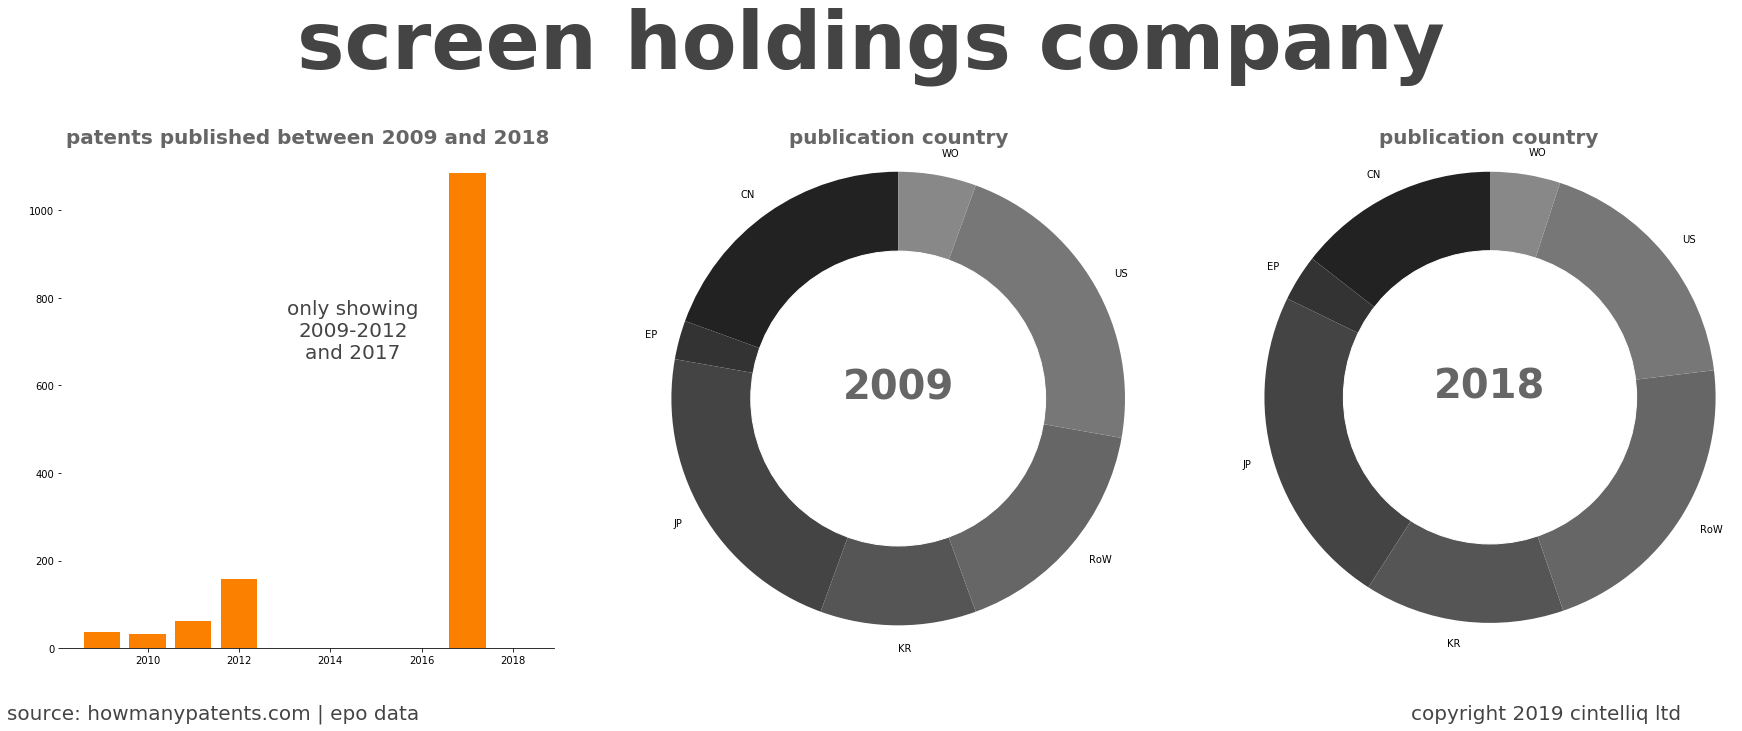 summary of patents for Screen Holdings Company